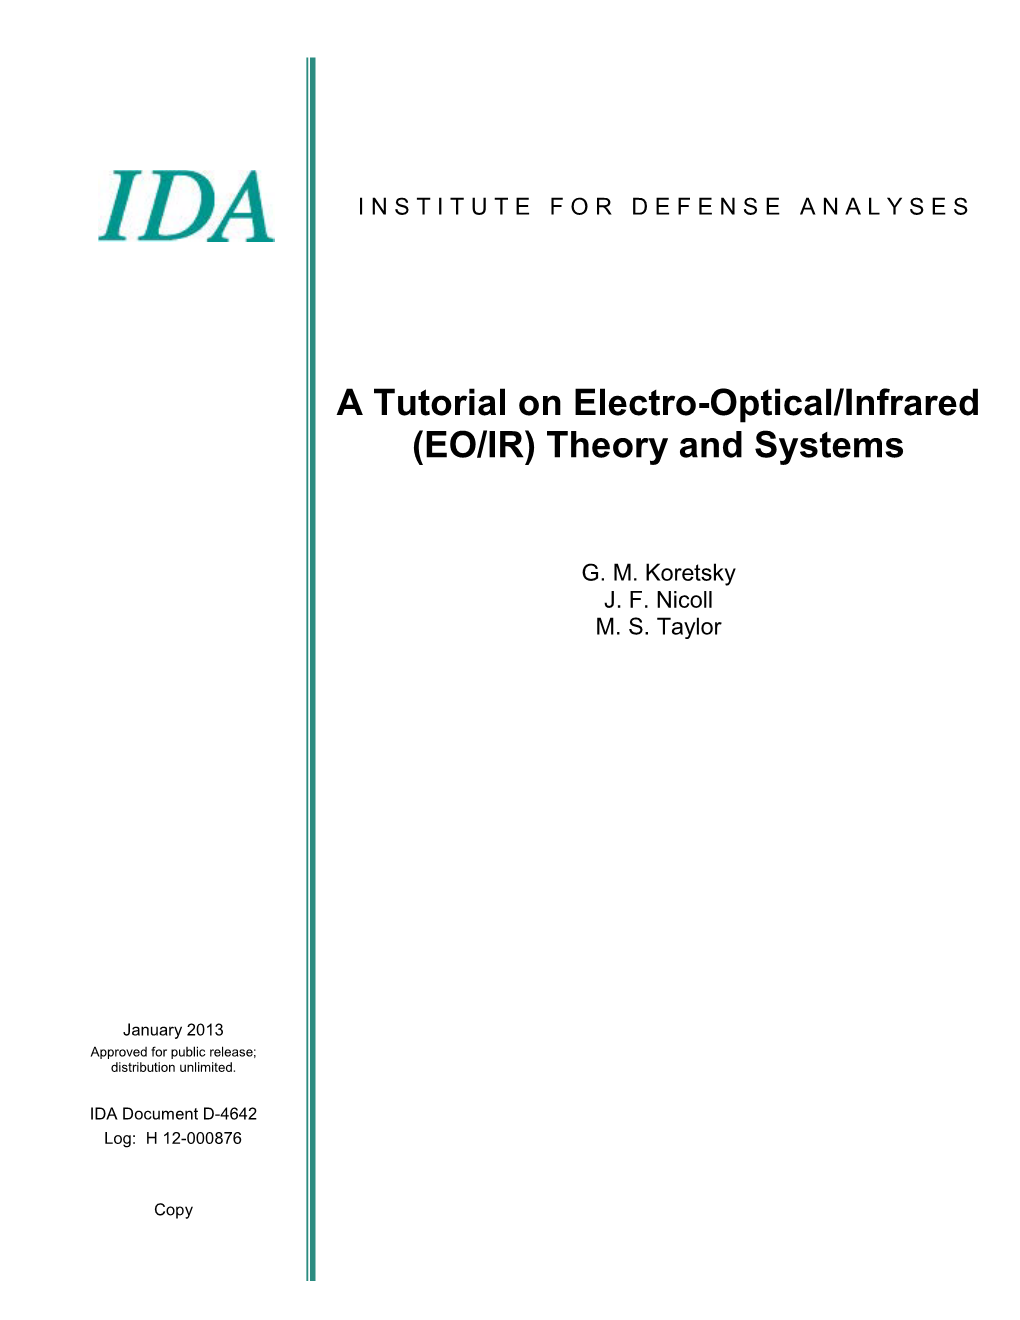 A Tutorial on Electro-Optical/Infrared (EO/IR) Theory and Systems